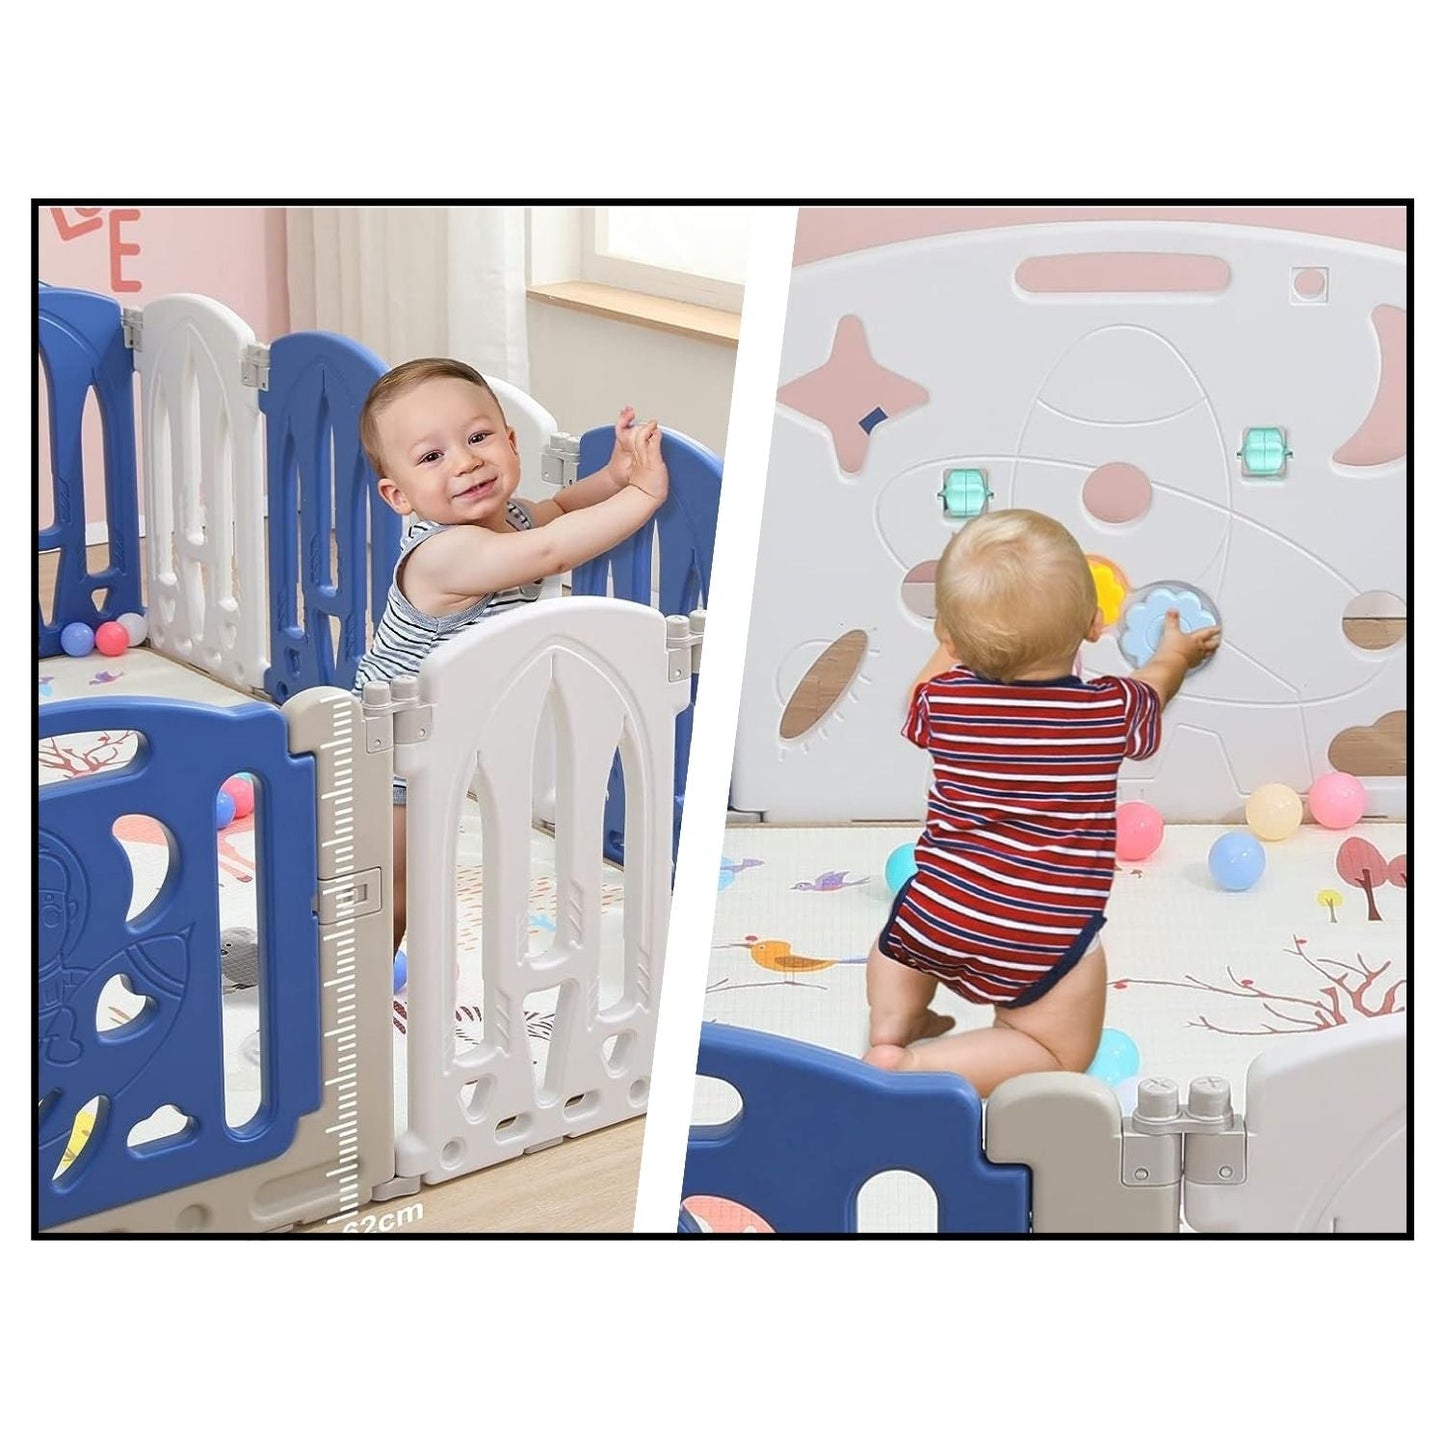 Foldable Baby Playpen Baby gate safety with 16 Panels (White Blue) - Little Kids Business